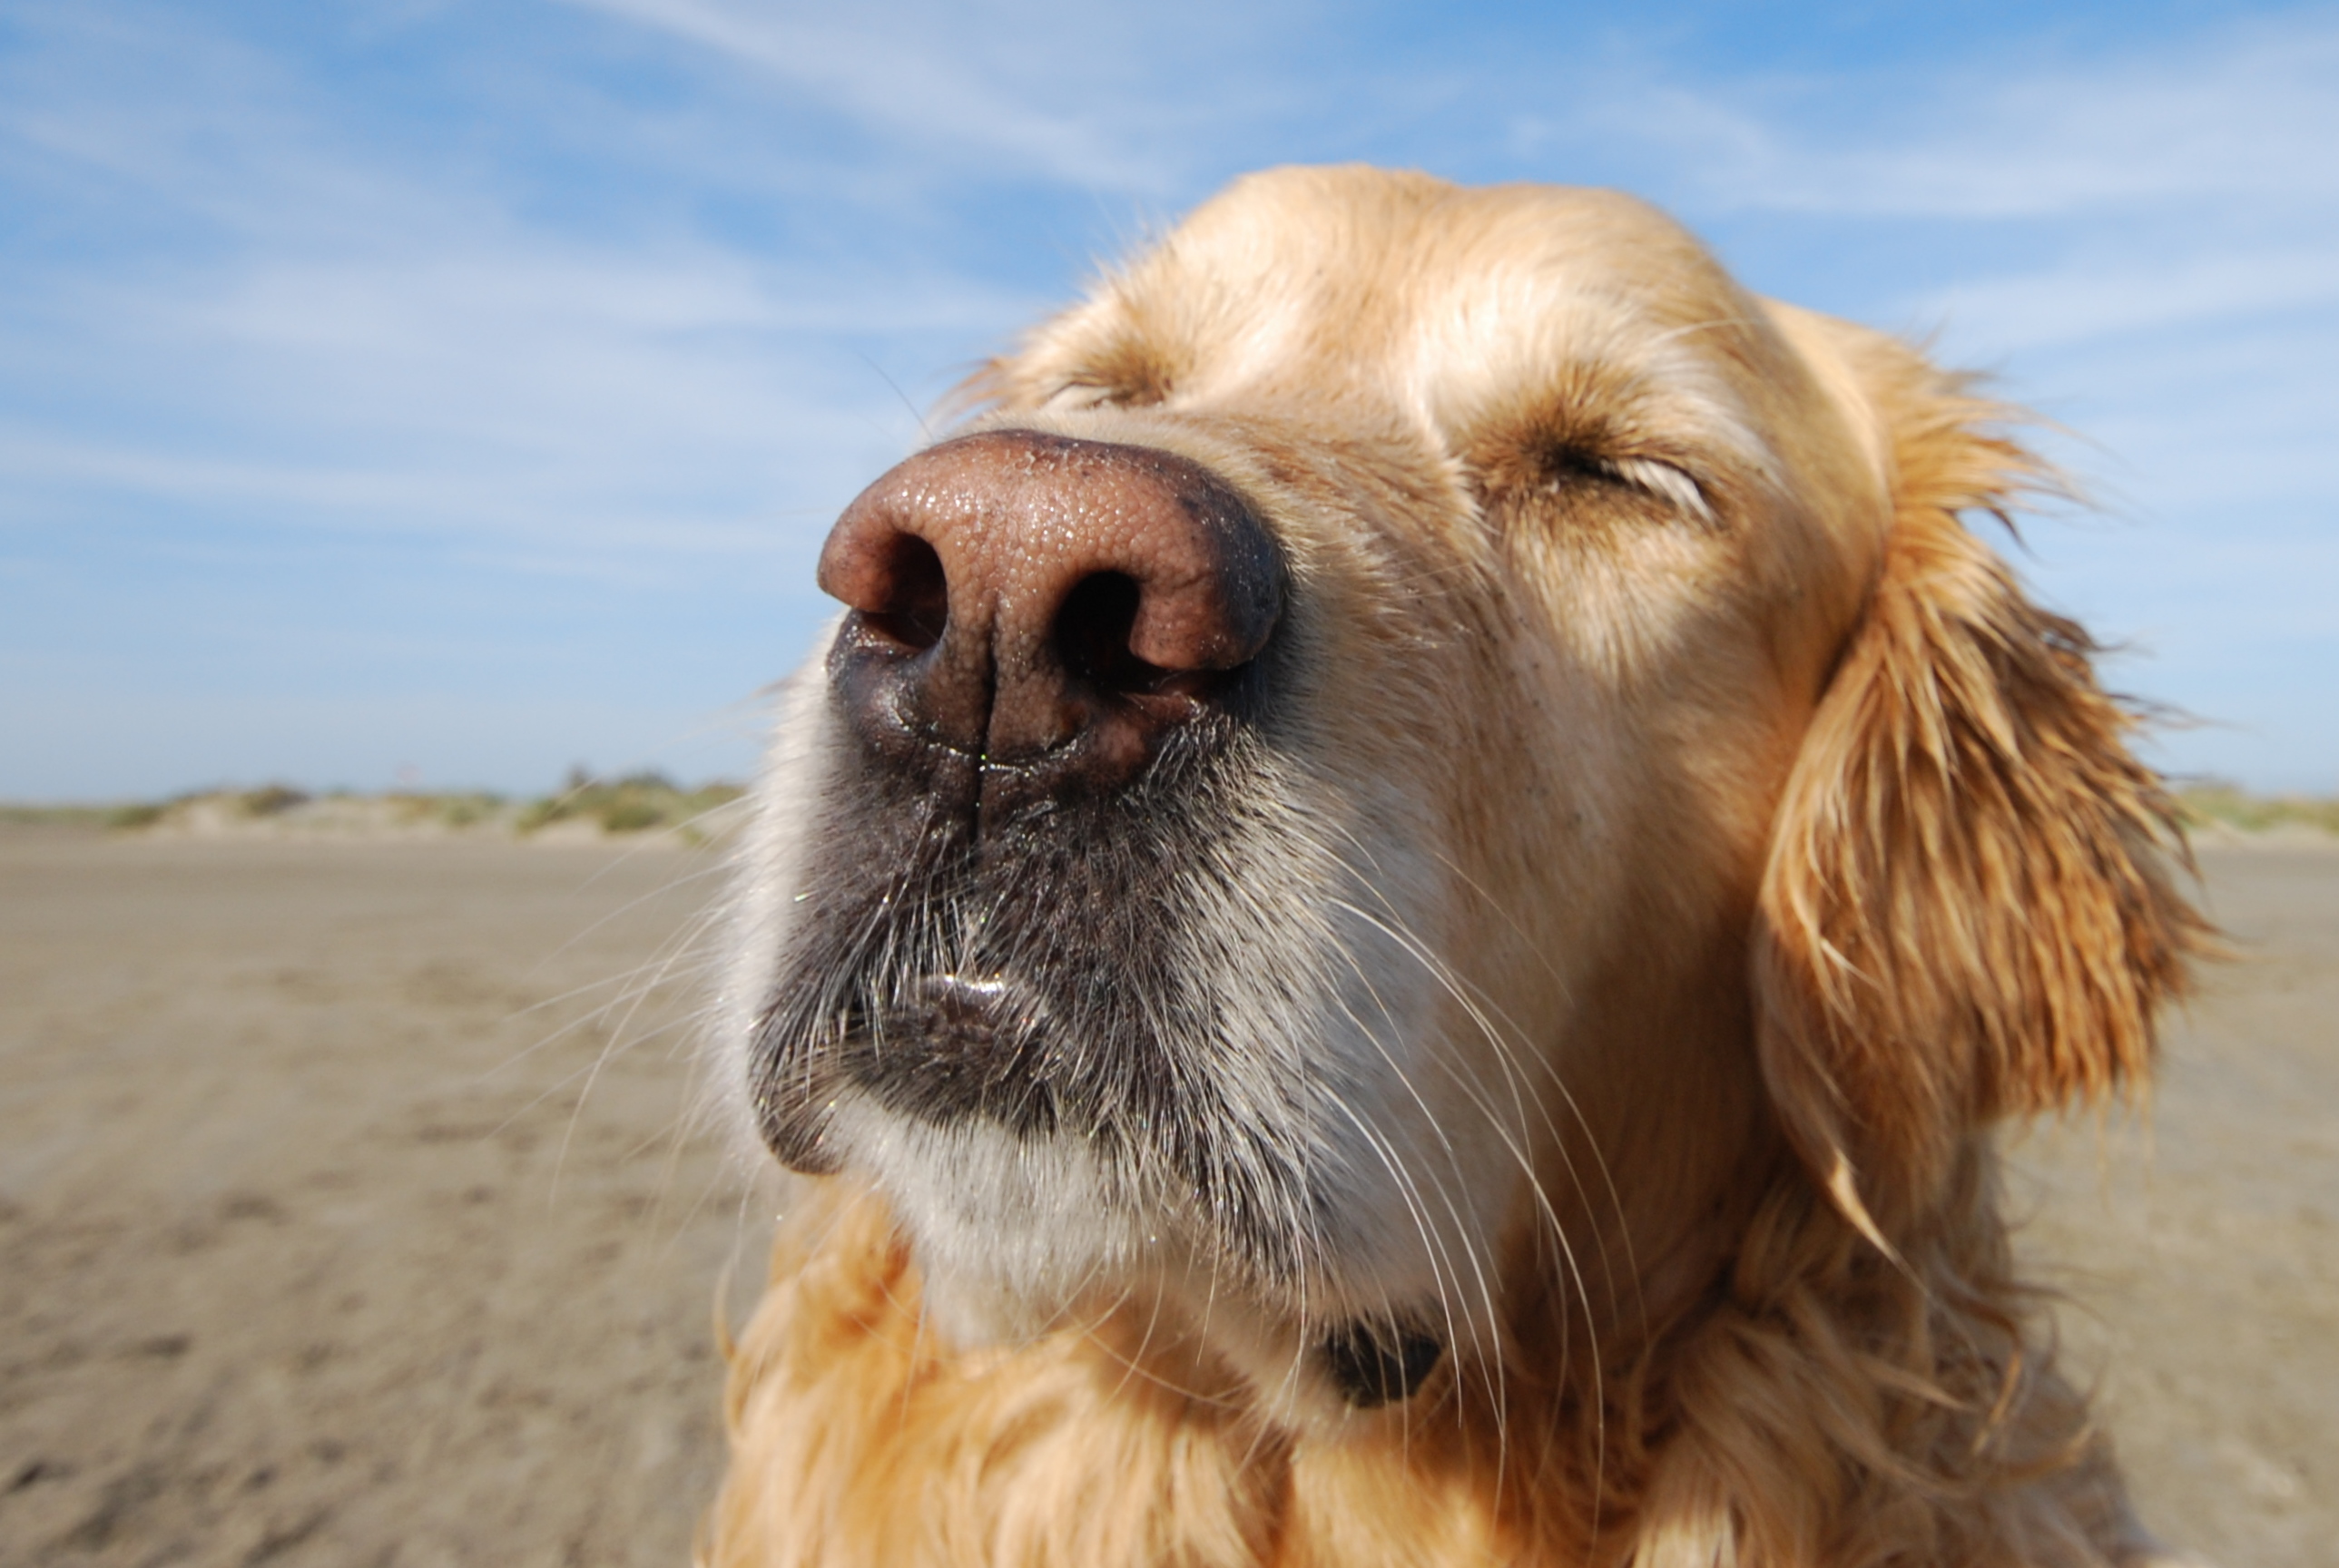 What are some pet-friendly beach destinations in the United States?